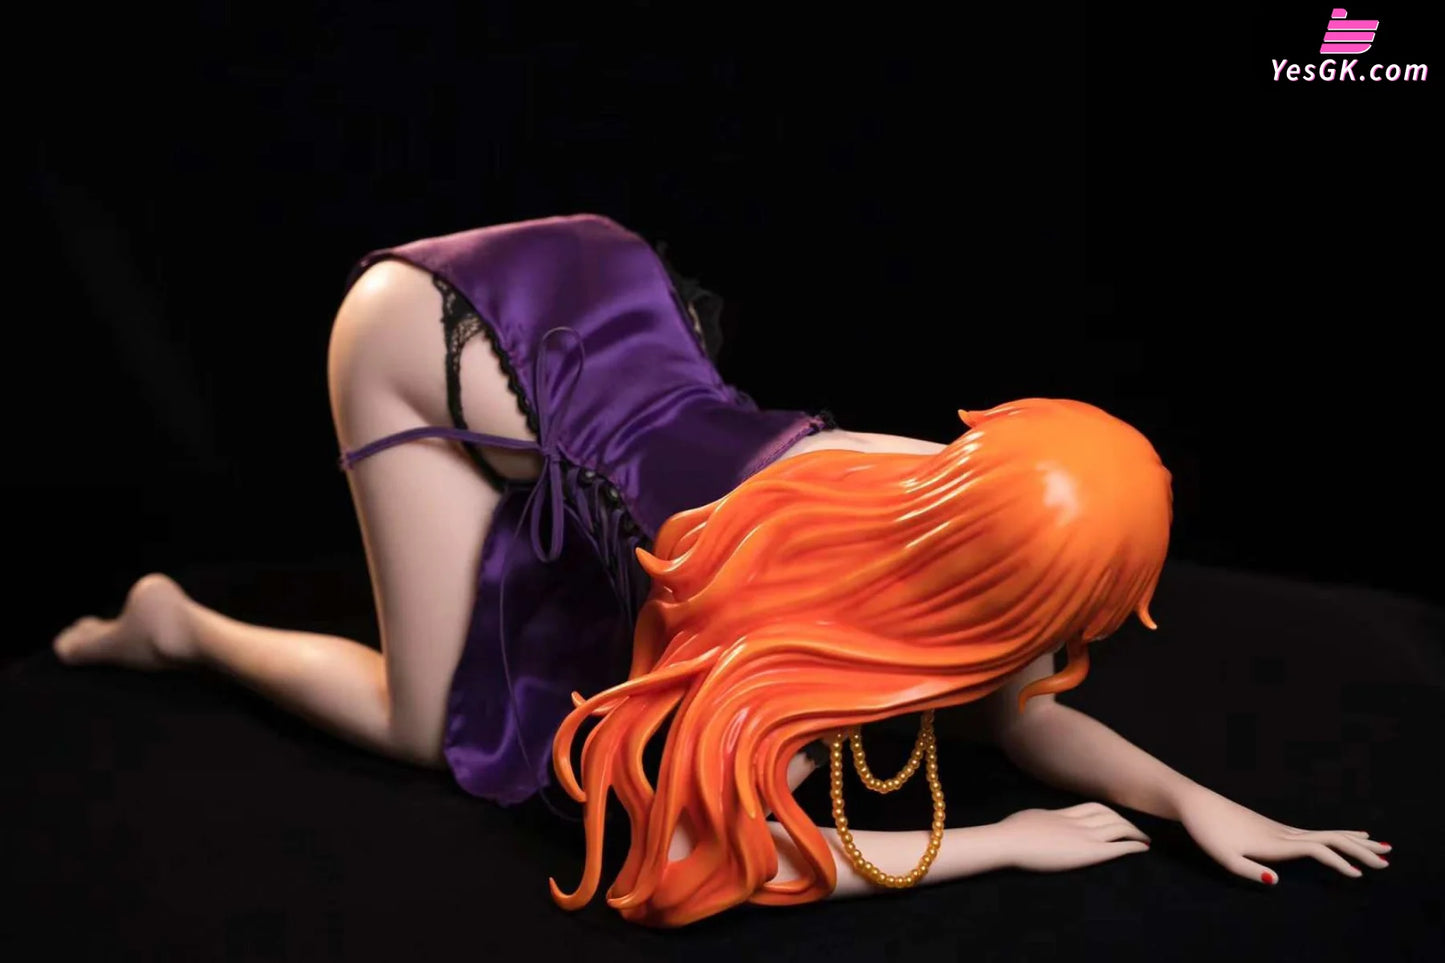 One Piece Nami With Semi Movable Silicone Body Statue - Ling Yun Studio [In-Stock]